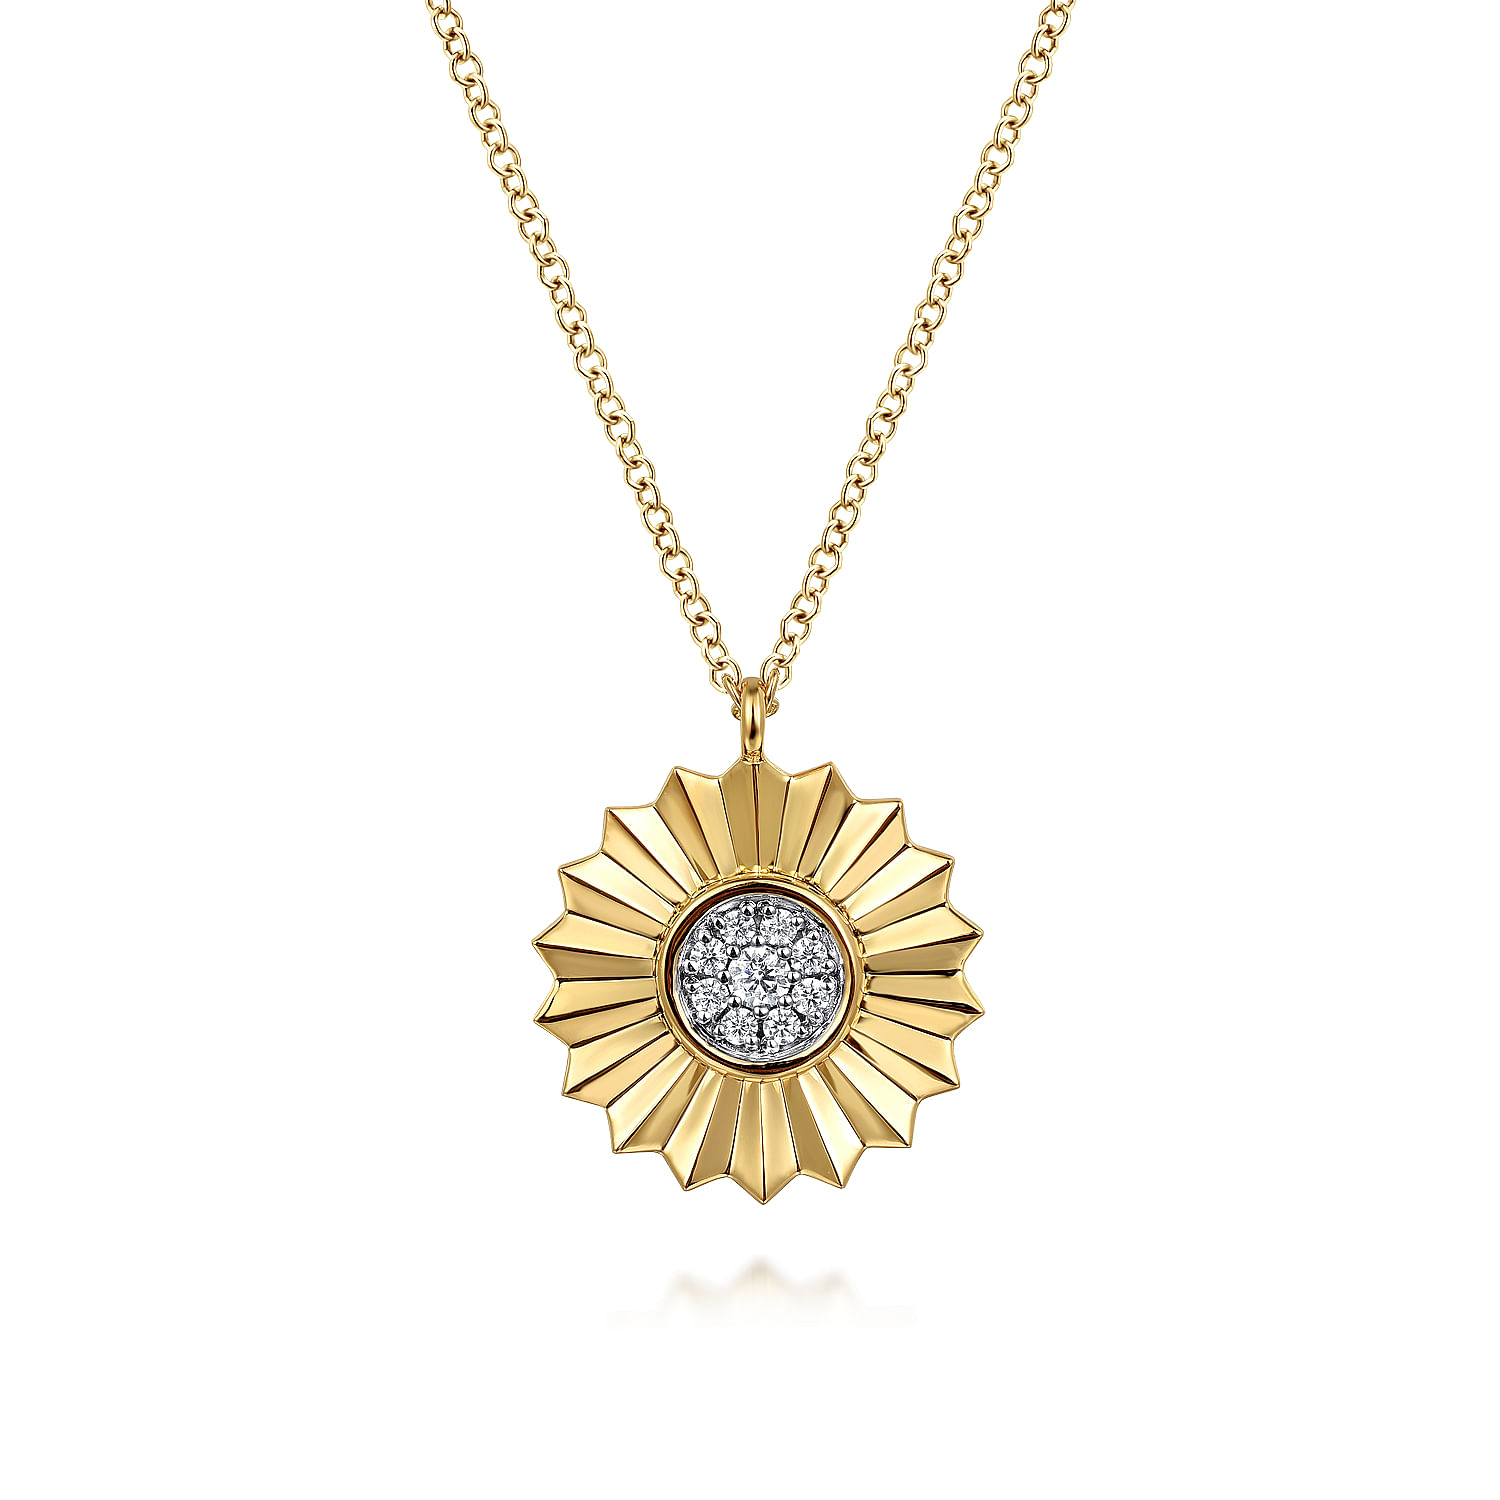 14K-White-and-Yellow-Gold-Diamond-Cut-Pendant-Necklace1